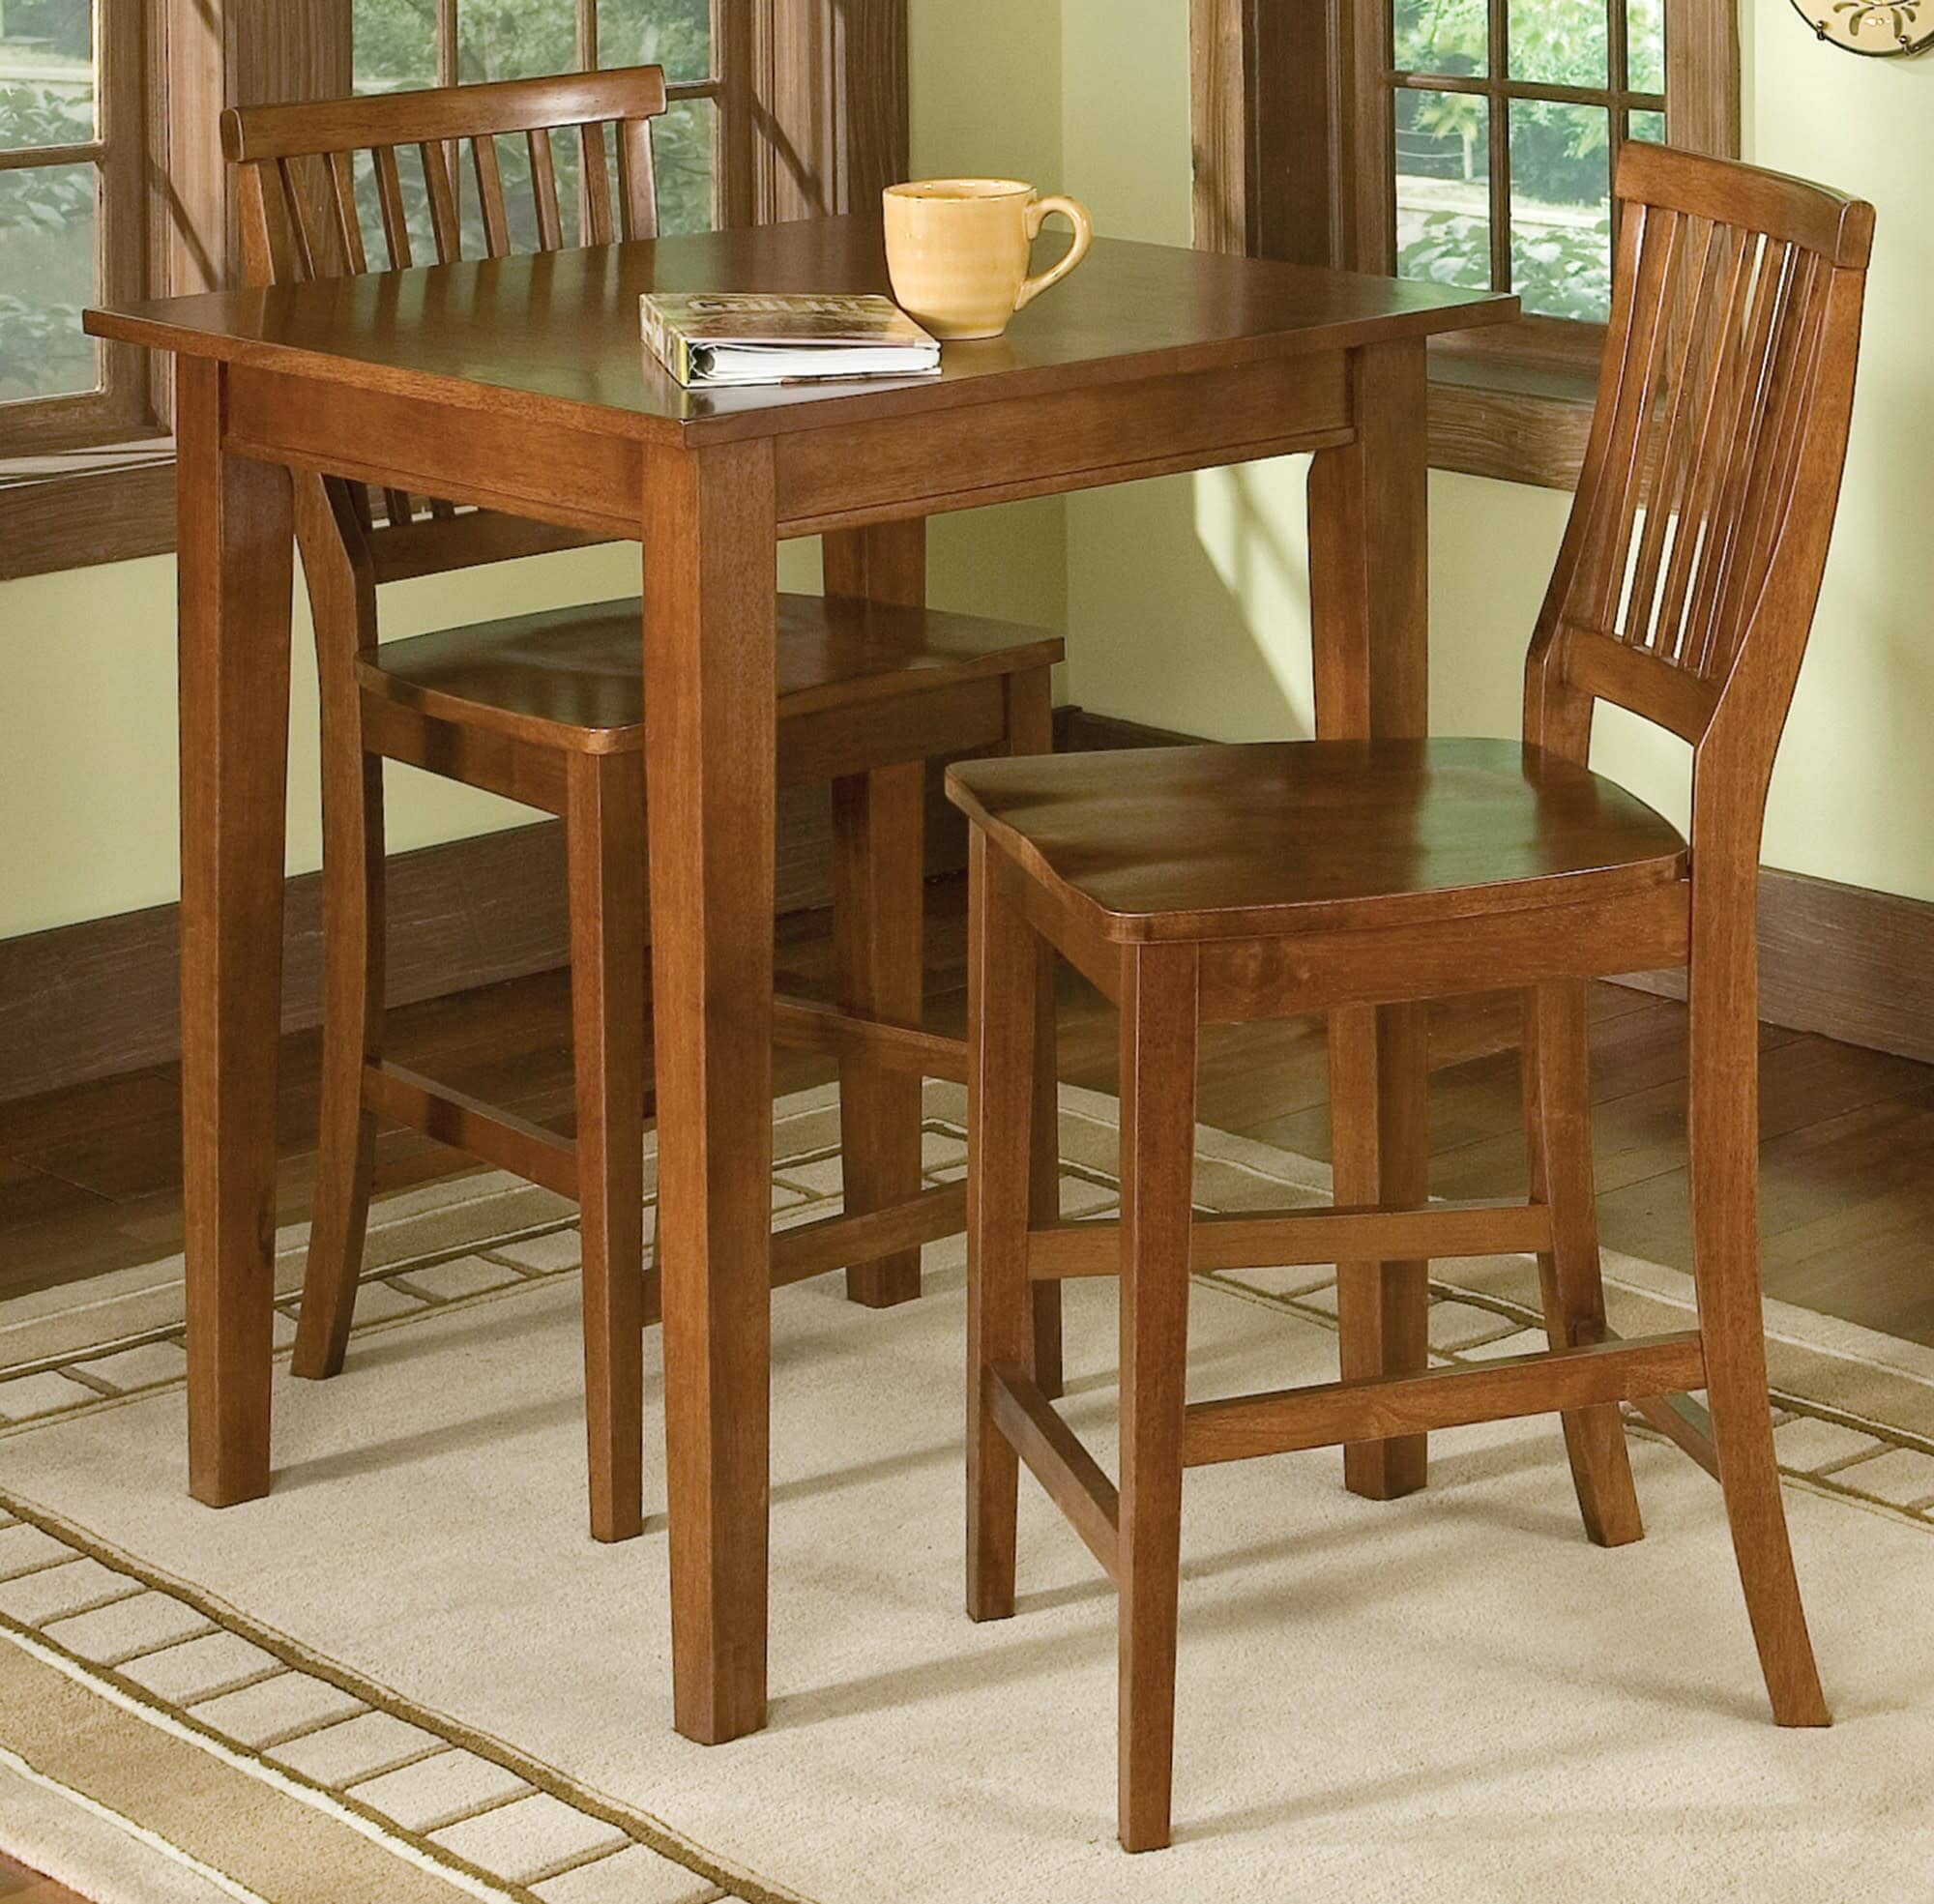 Traditional Bistro Table By Arts & Crafts Dining Table & Chairs Arts & Crafts